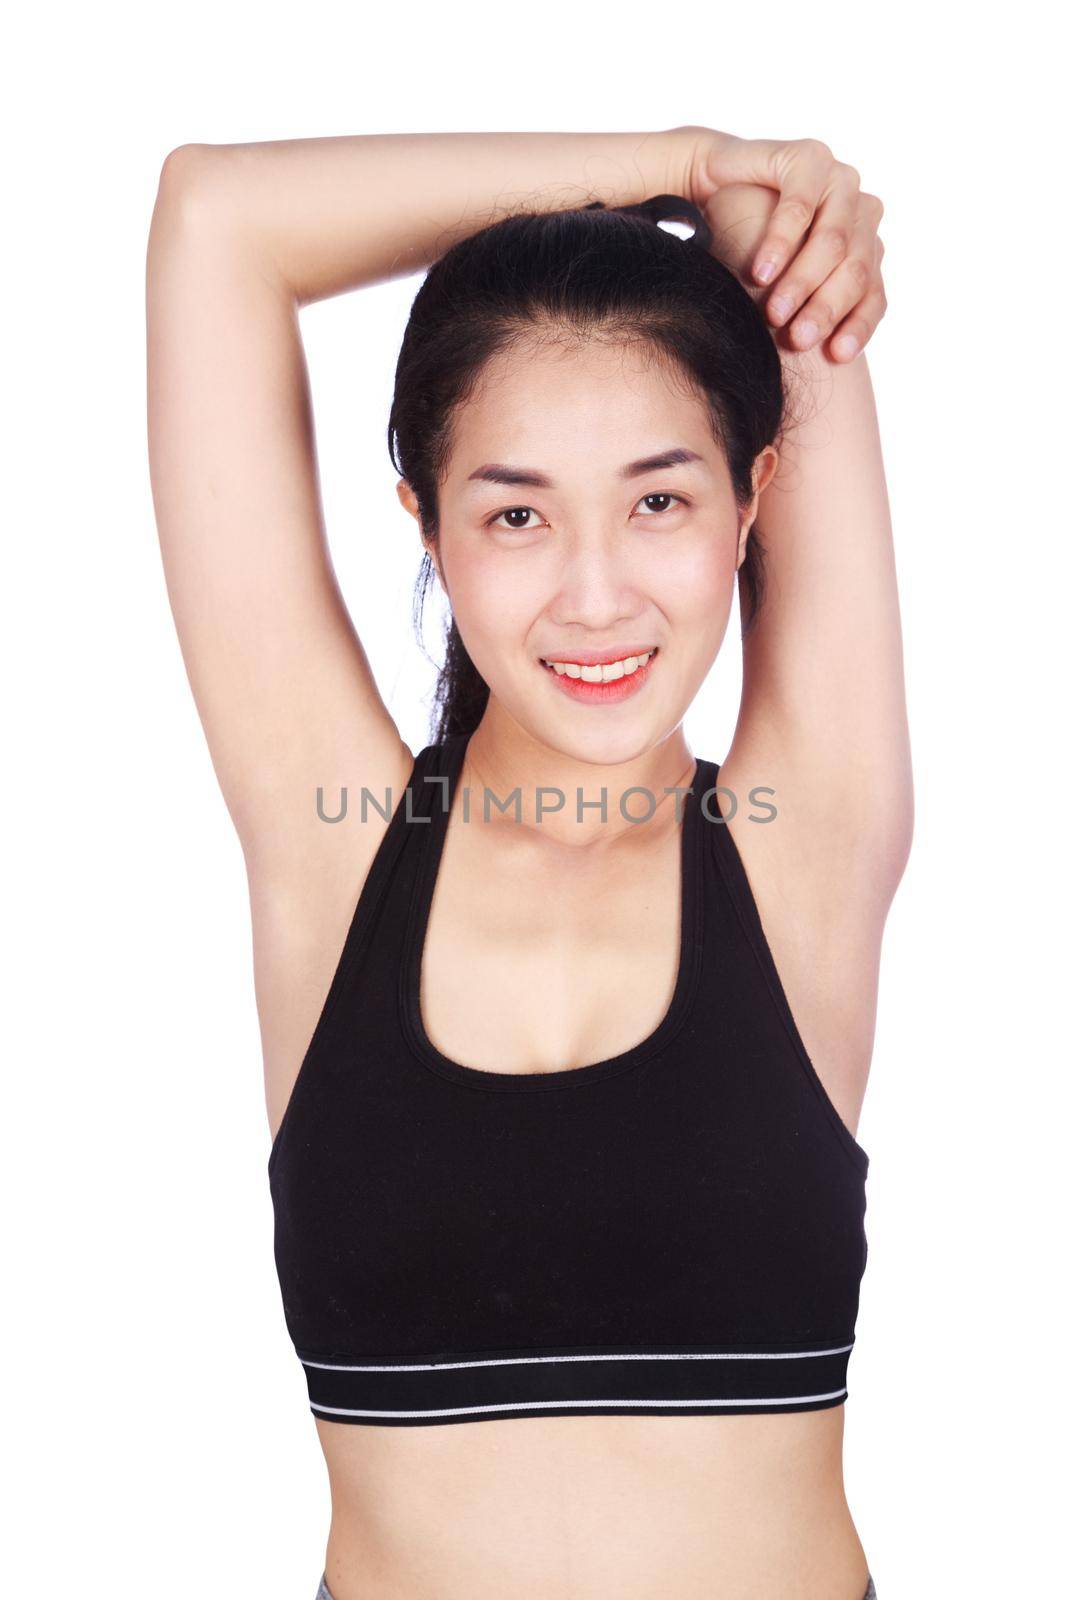 fitness woman stretching the muscles of her arms isolated on a white background